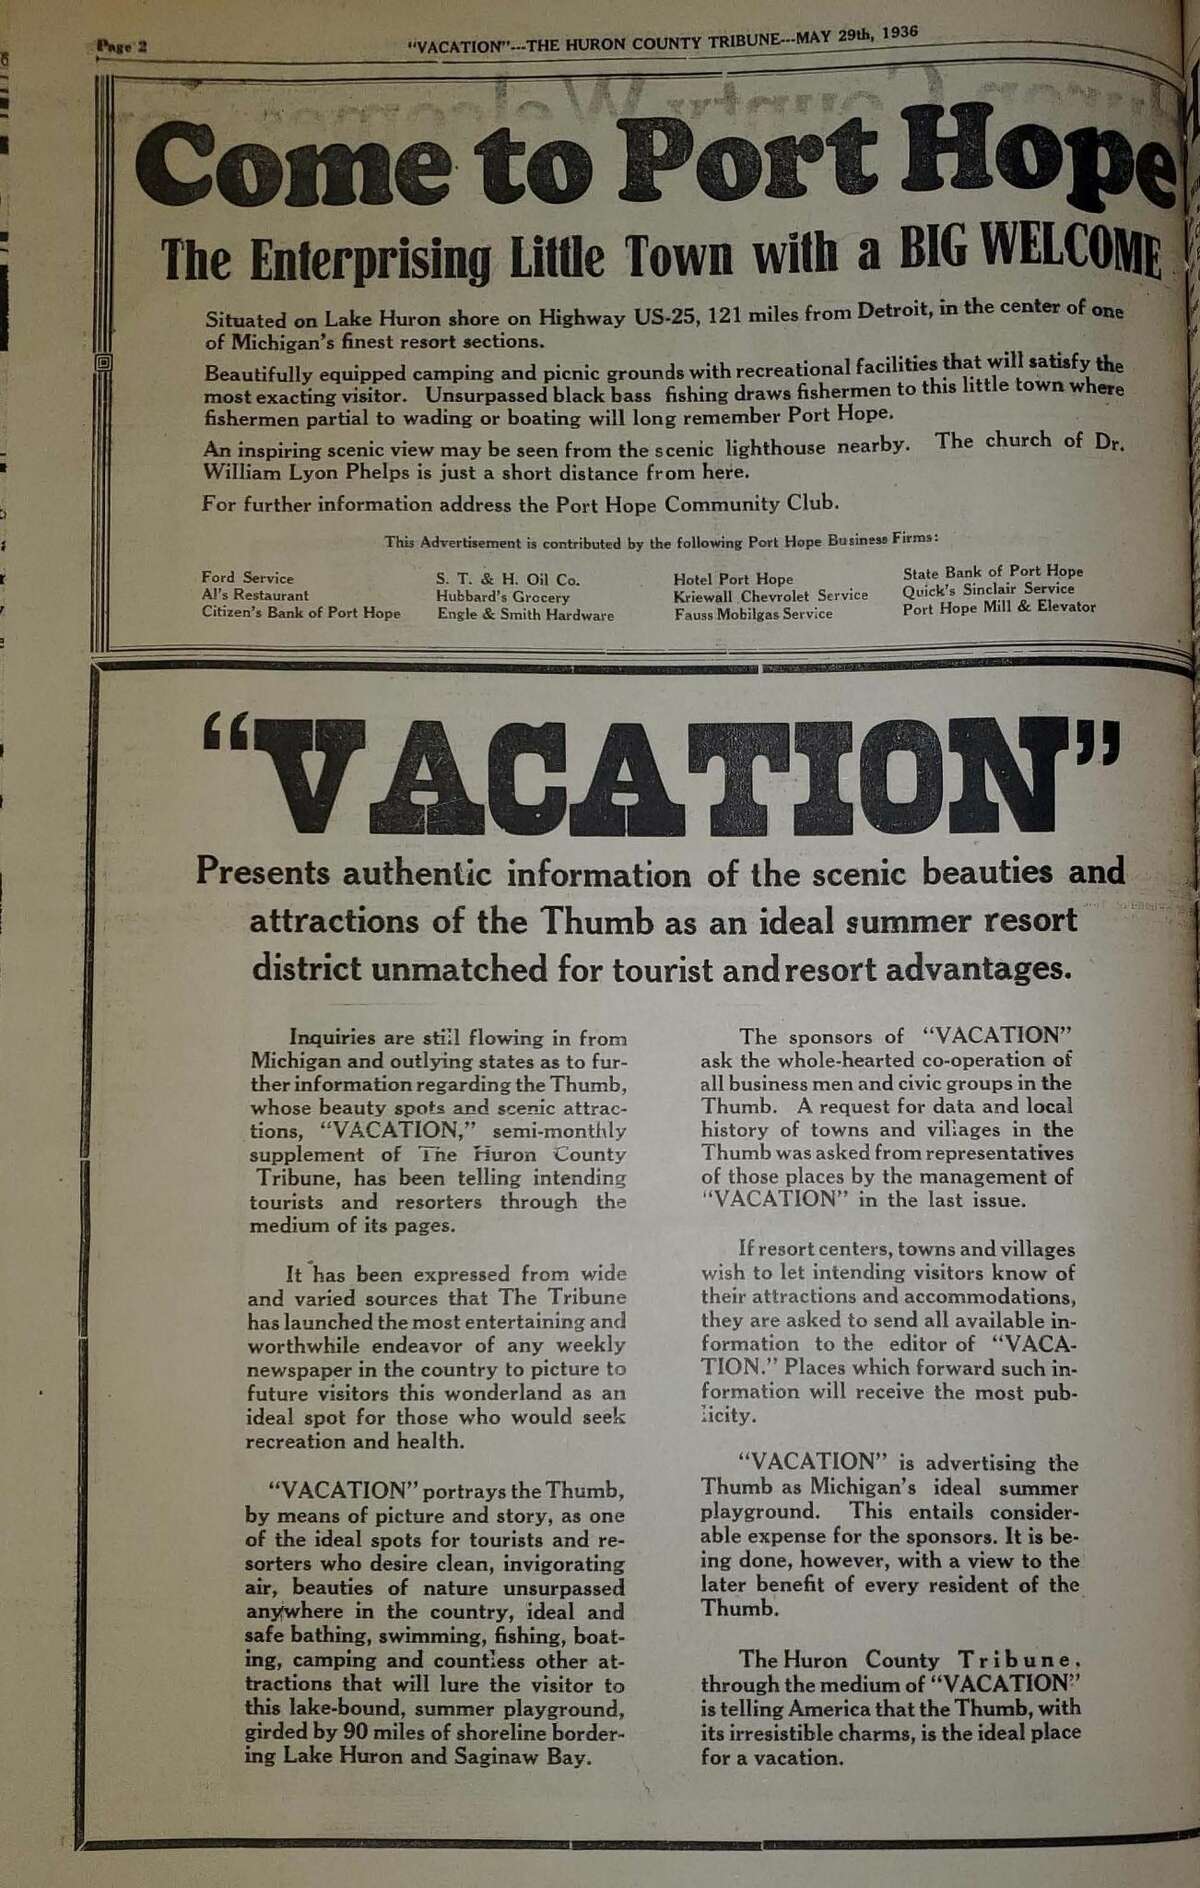 For this week's Tribune Throwback we take a look at the Thumb Traveler from May 29, 1936 and the Huron County Tribune from June 1936.